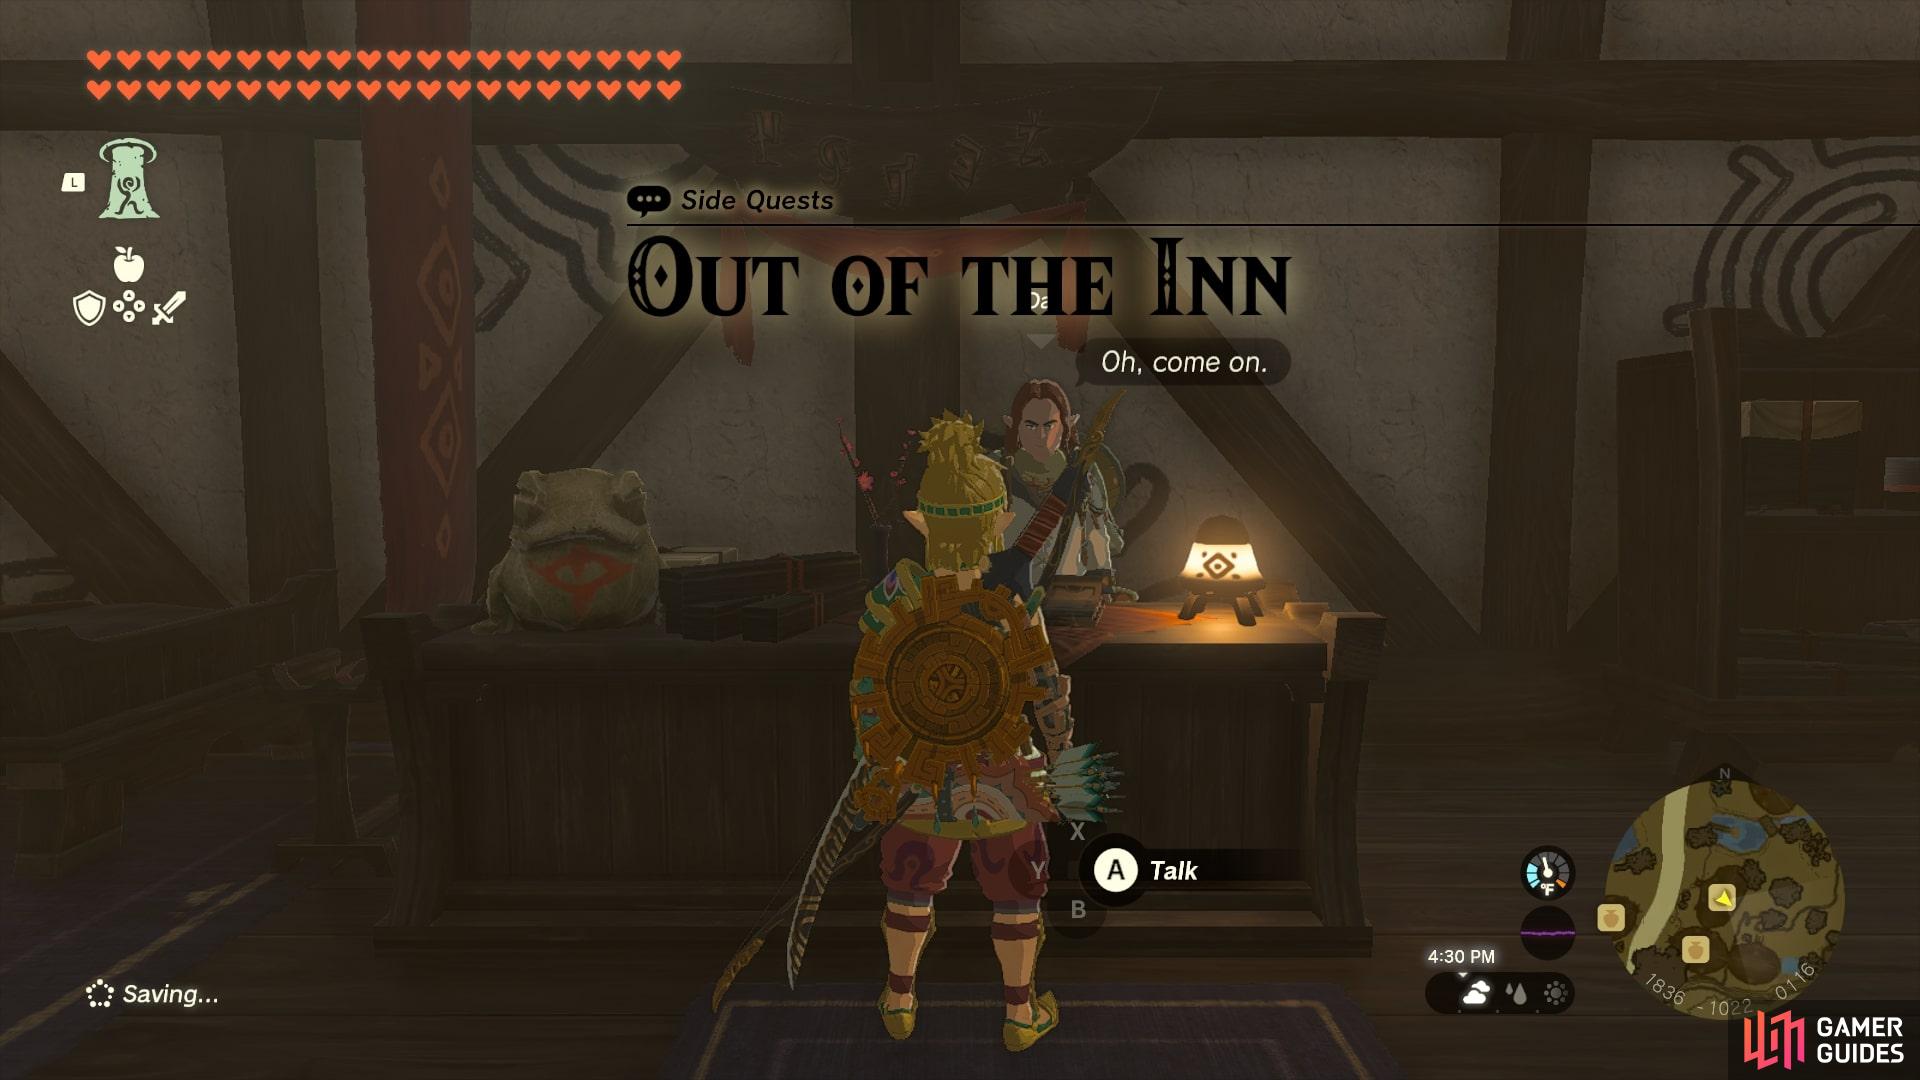 Speak with Dai to start Out of The Inn.